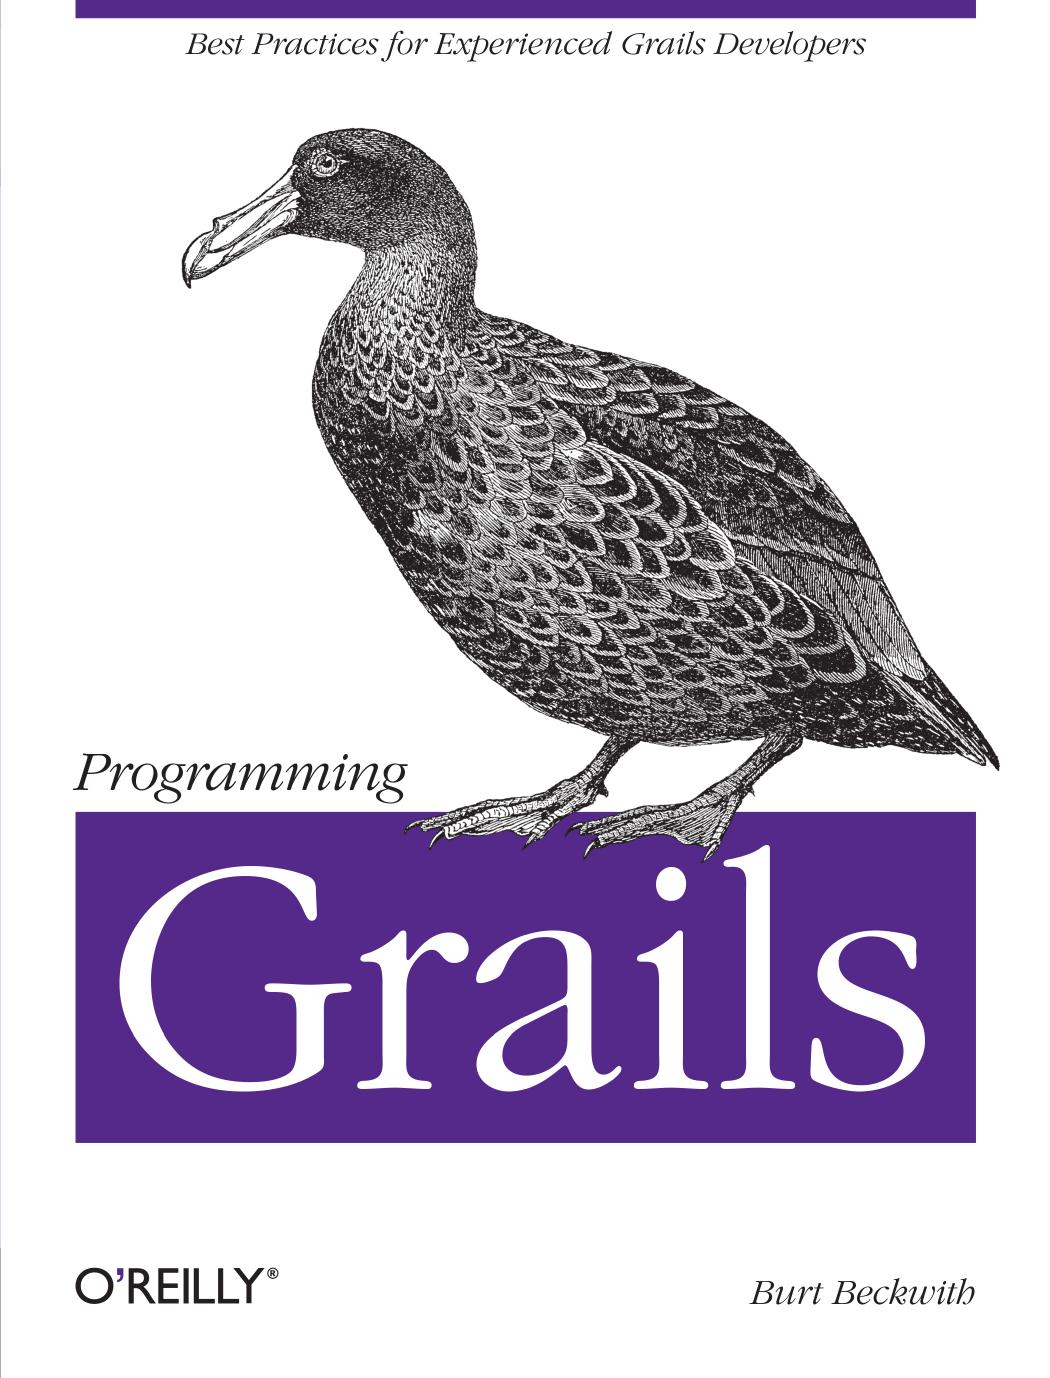 Programming Grails by Burt Beckwith